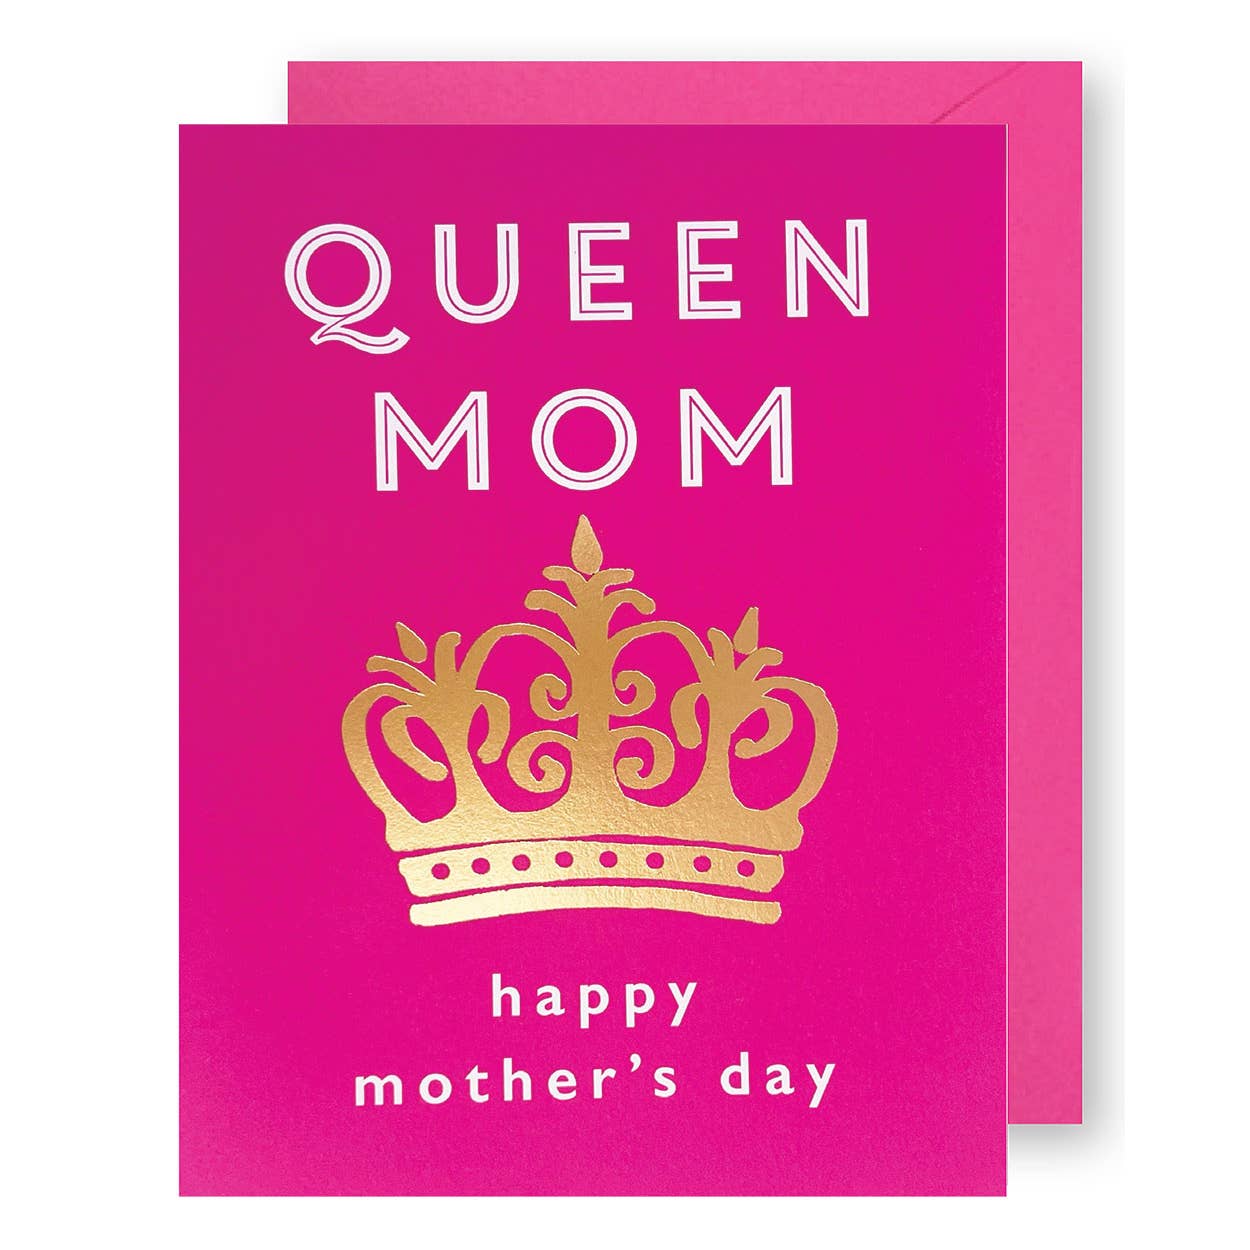 Queen Mom Mother's Day Greeting Card